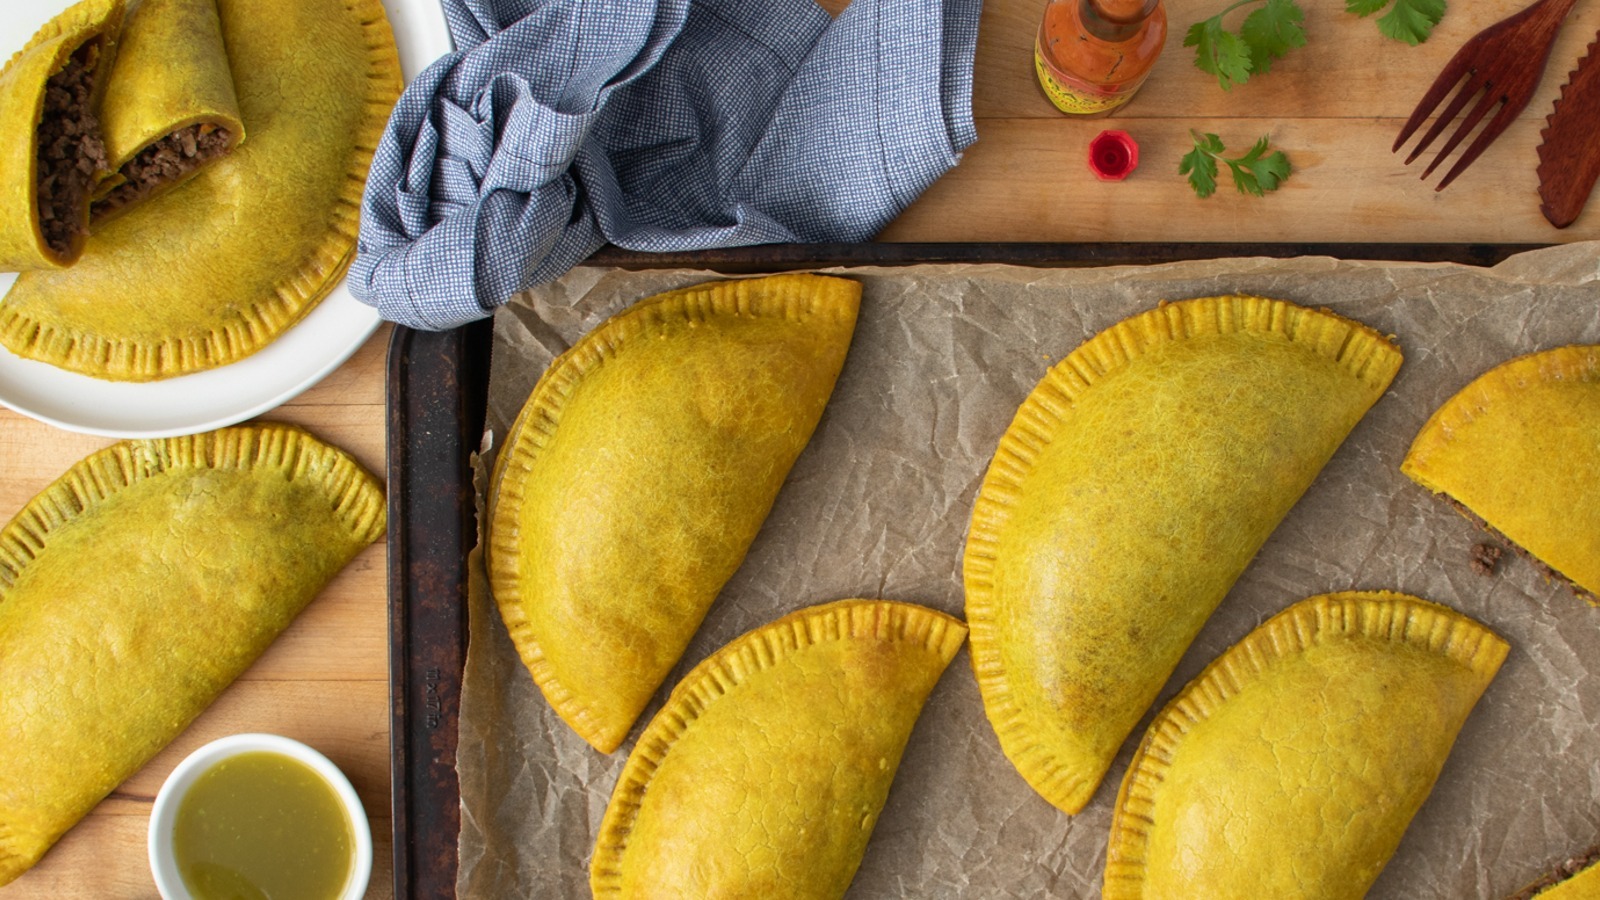 https://www.mashed.com/img/gallery/baked-jamaican-beef-patties-recipe/l-intro-1689687122.jpg